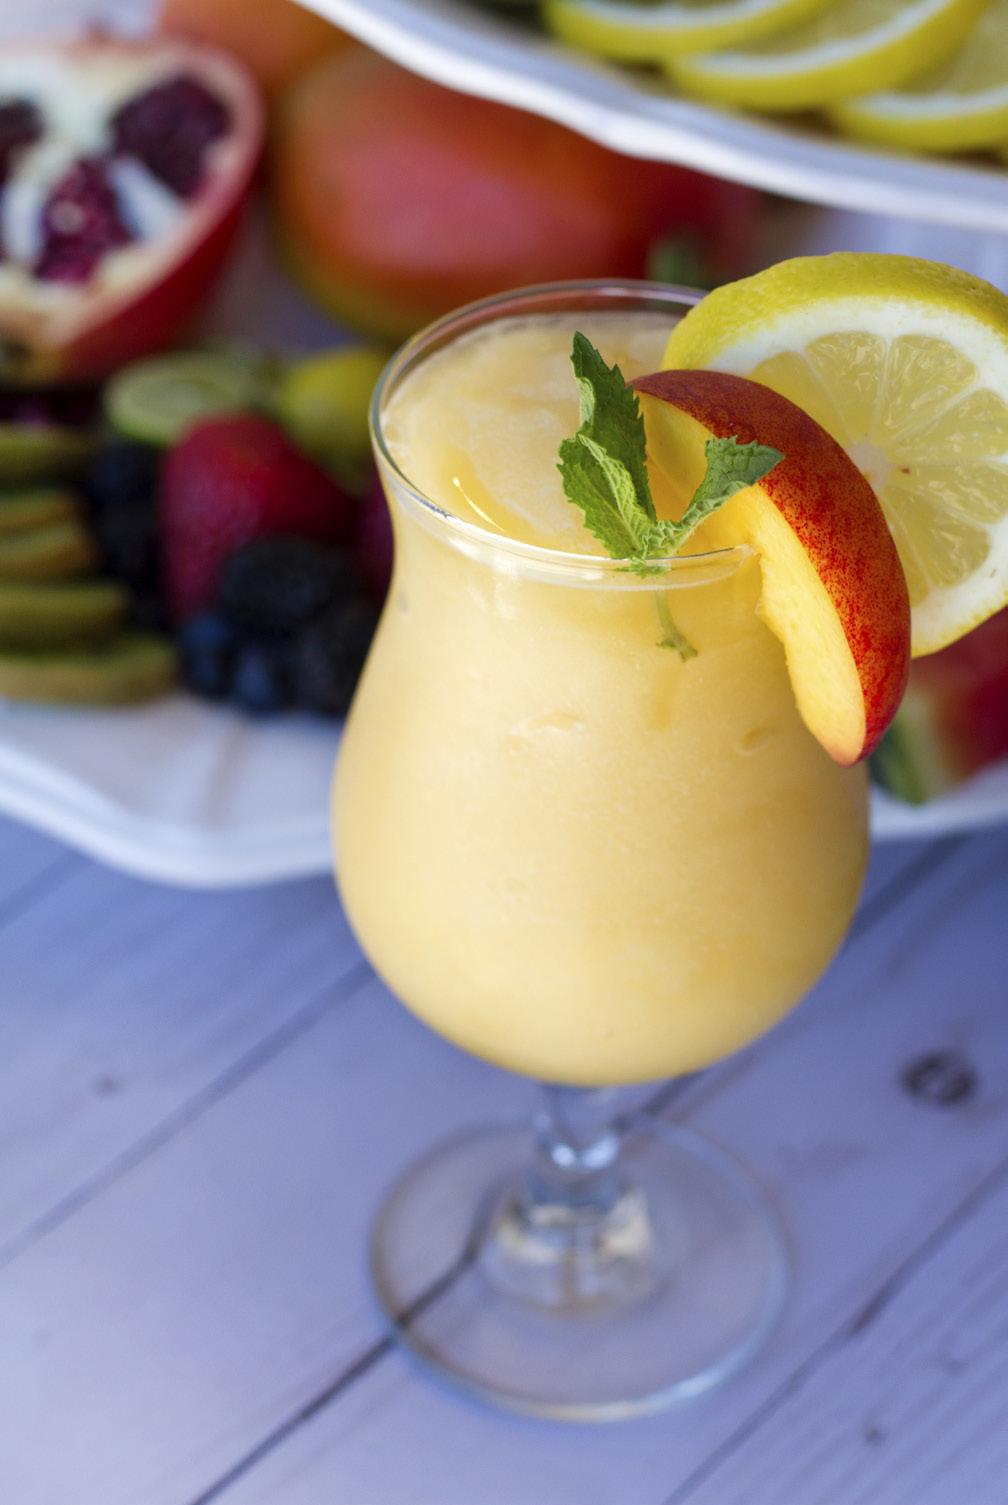 Refreshing Frozen Peach Lemonade Just what the doctor ordered, this frozen lemonade smoothie is a refreshing remedy for scorching summer temperatures.